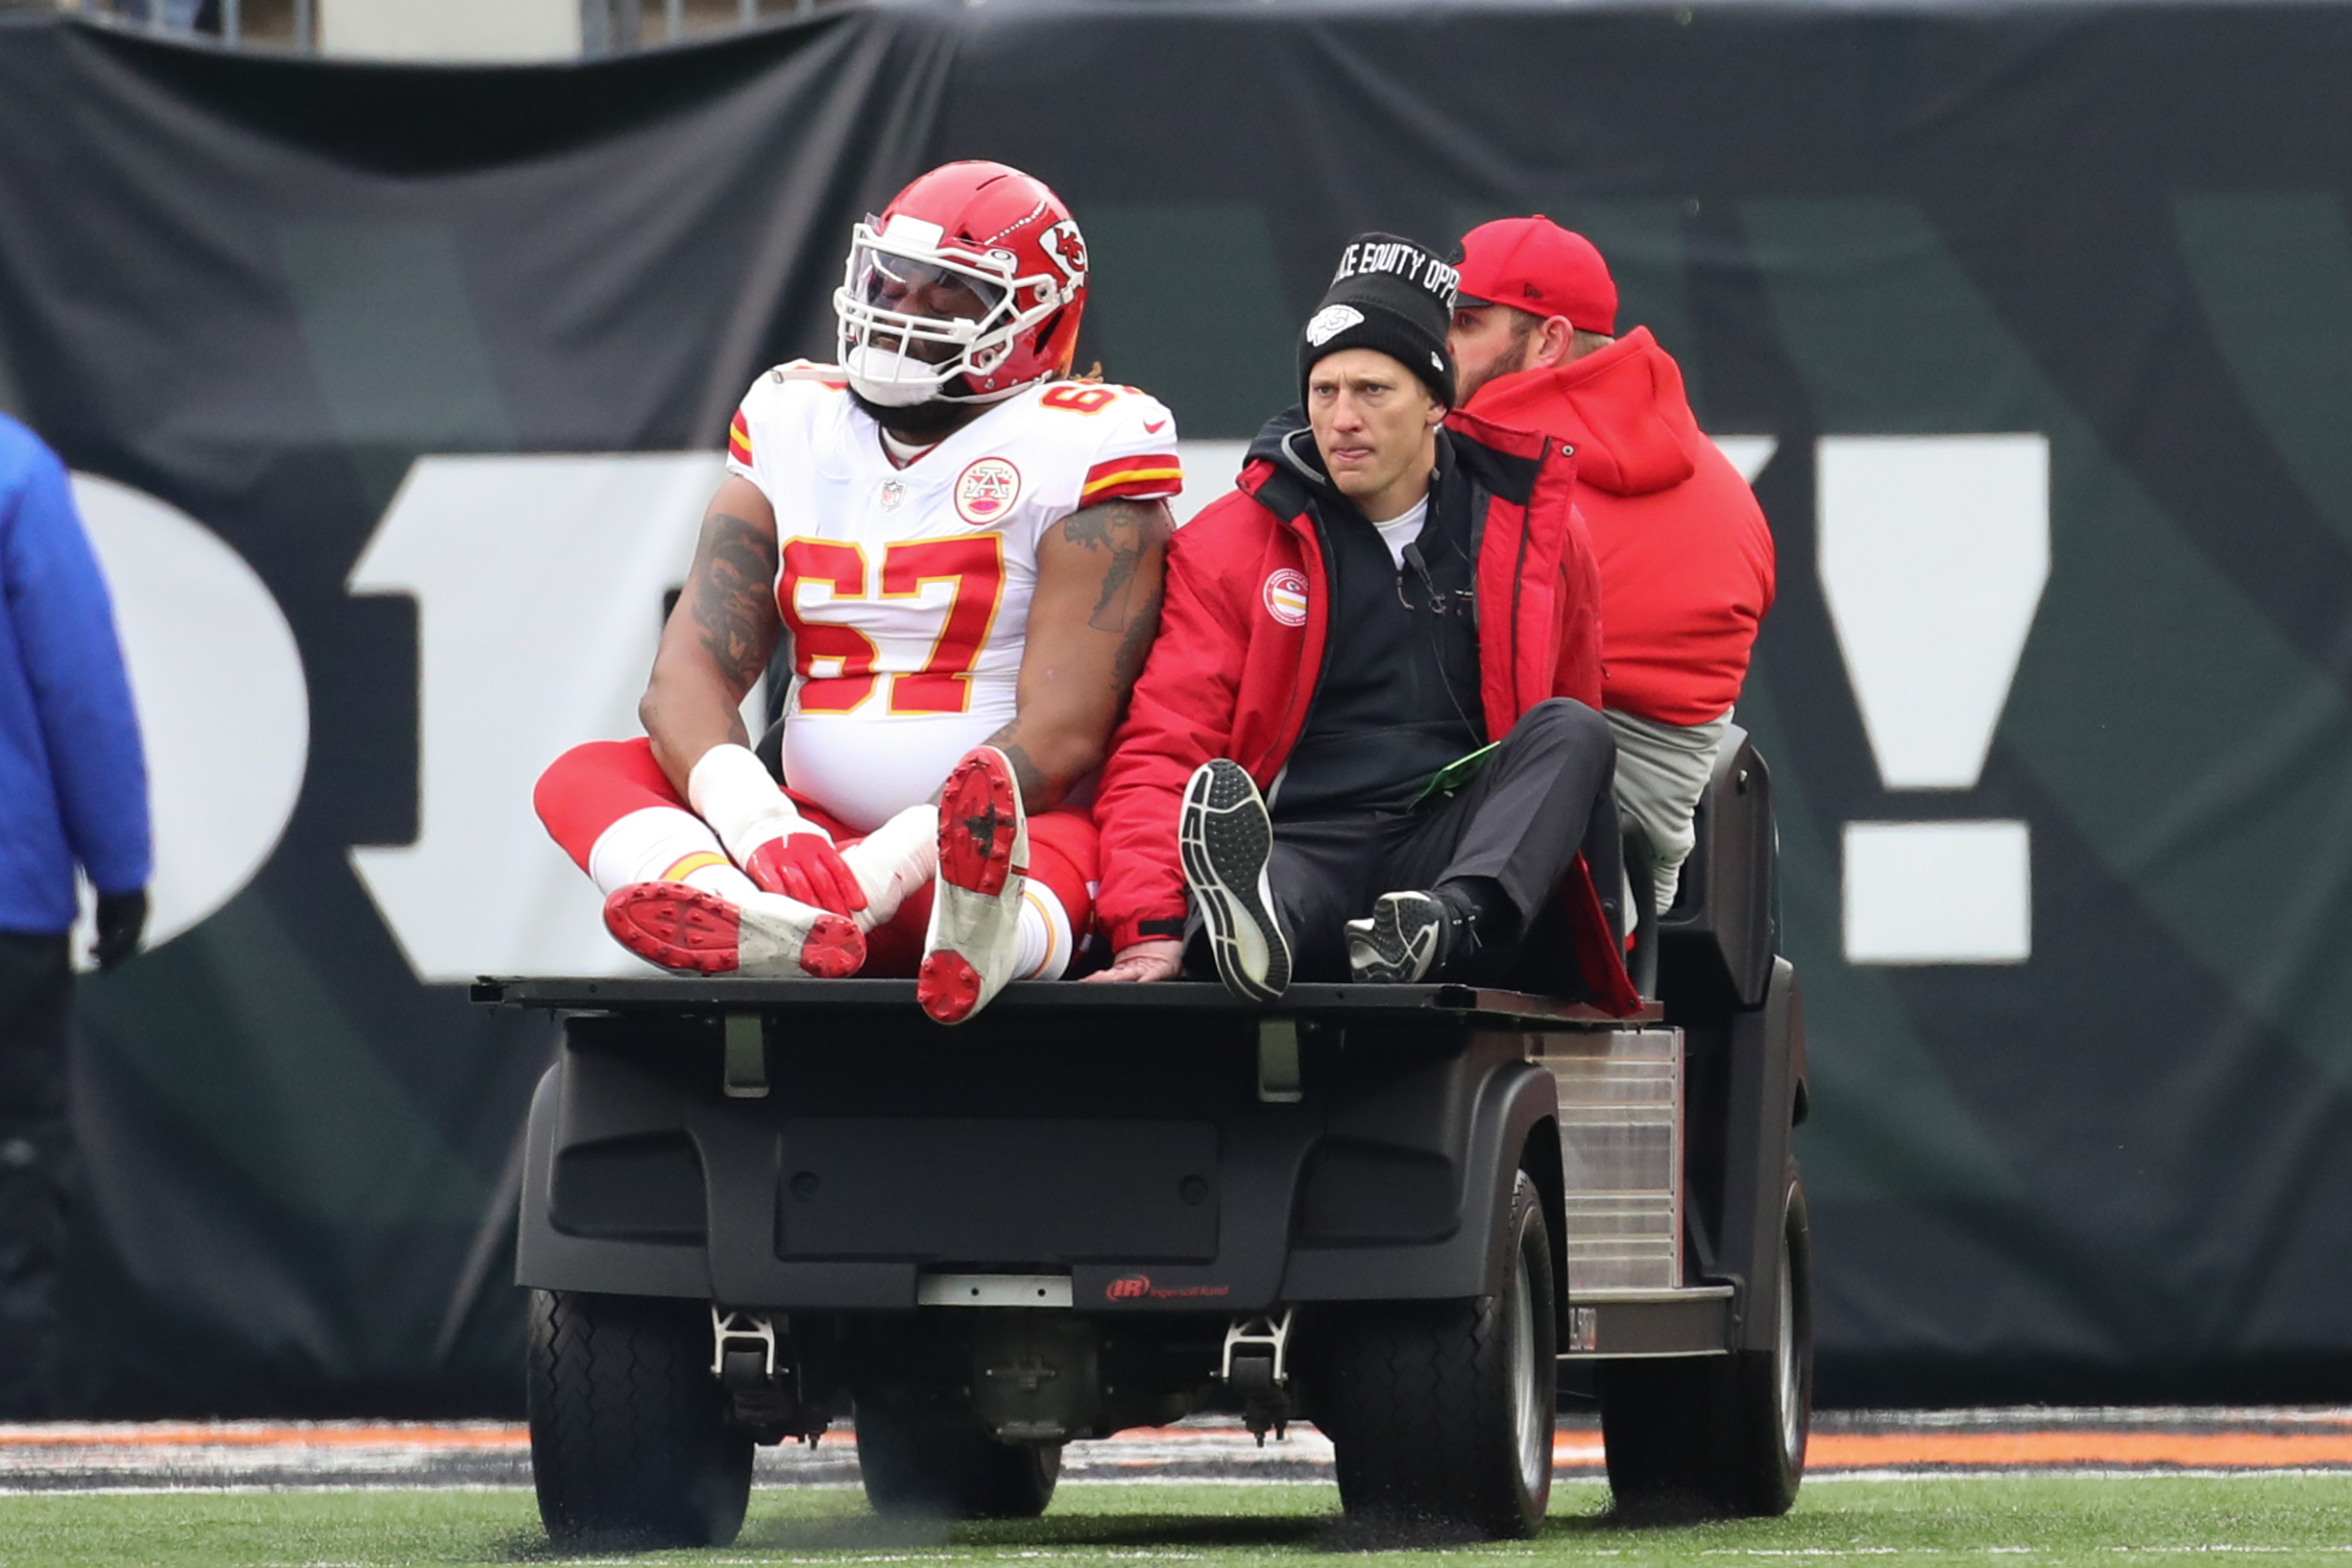 Patrick Mahomes and the Chiefs lose Lucas Niang to an injury